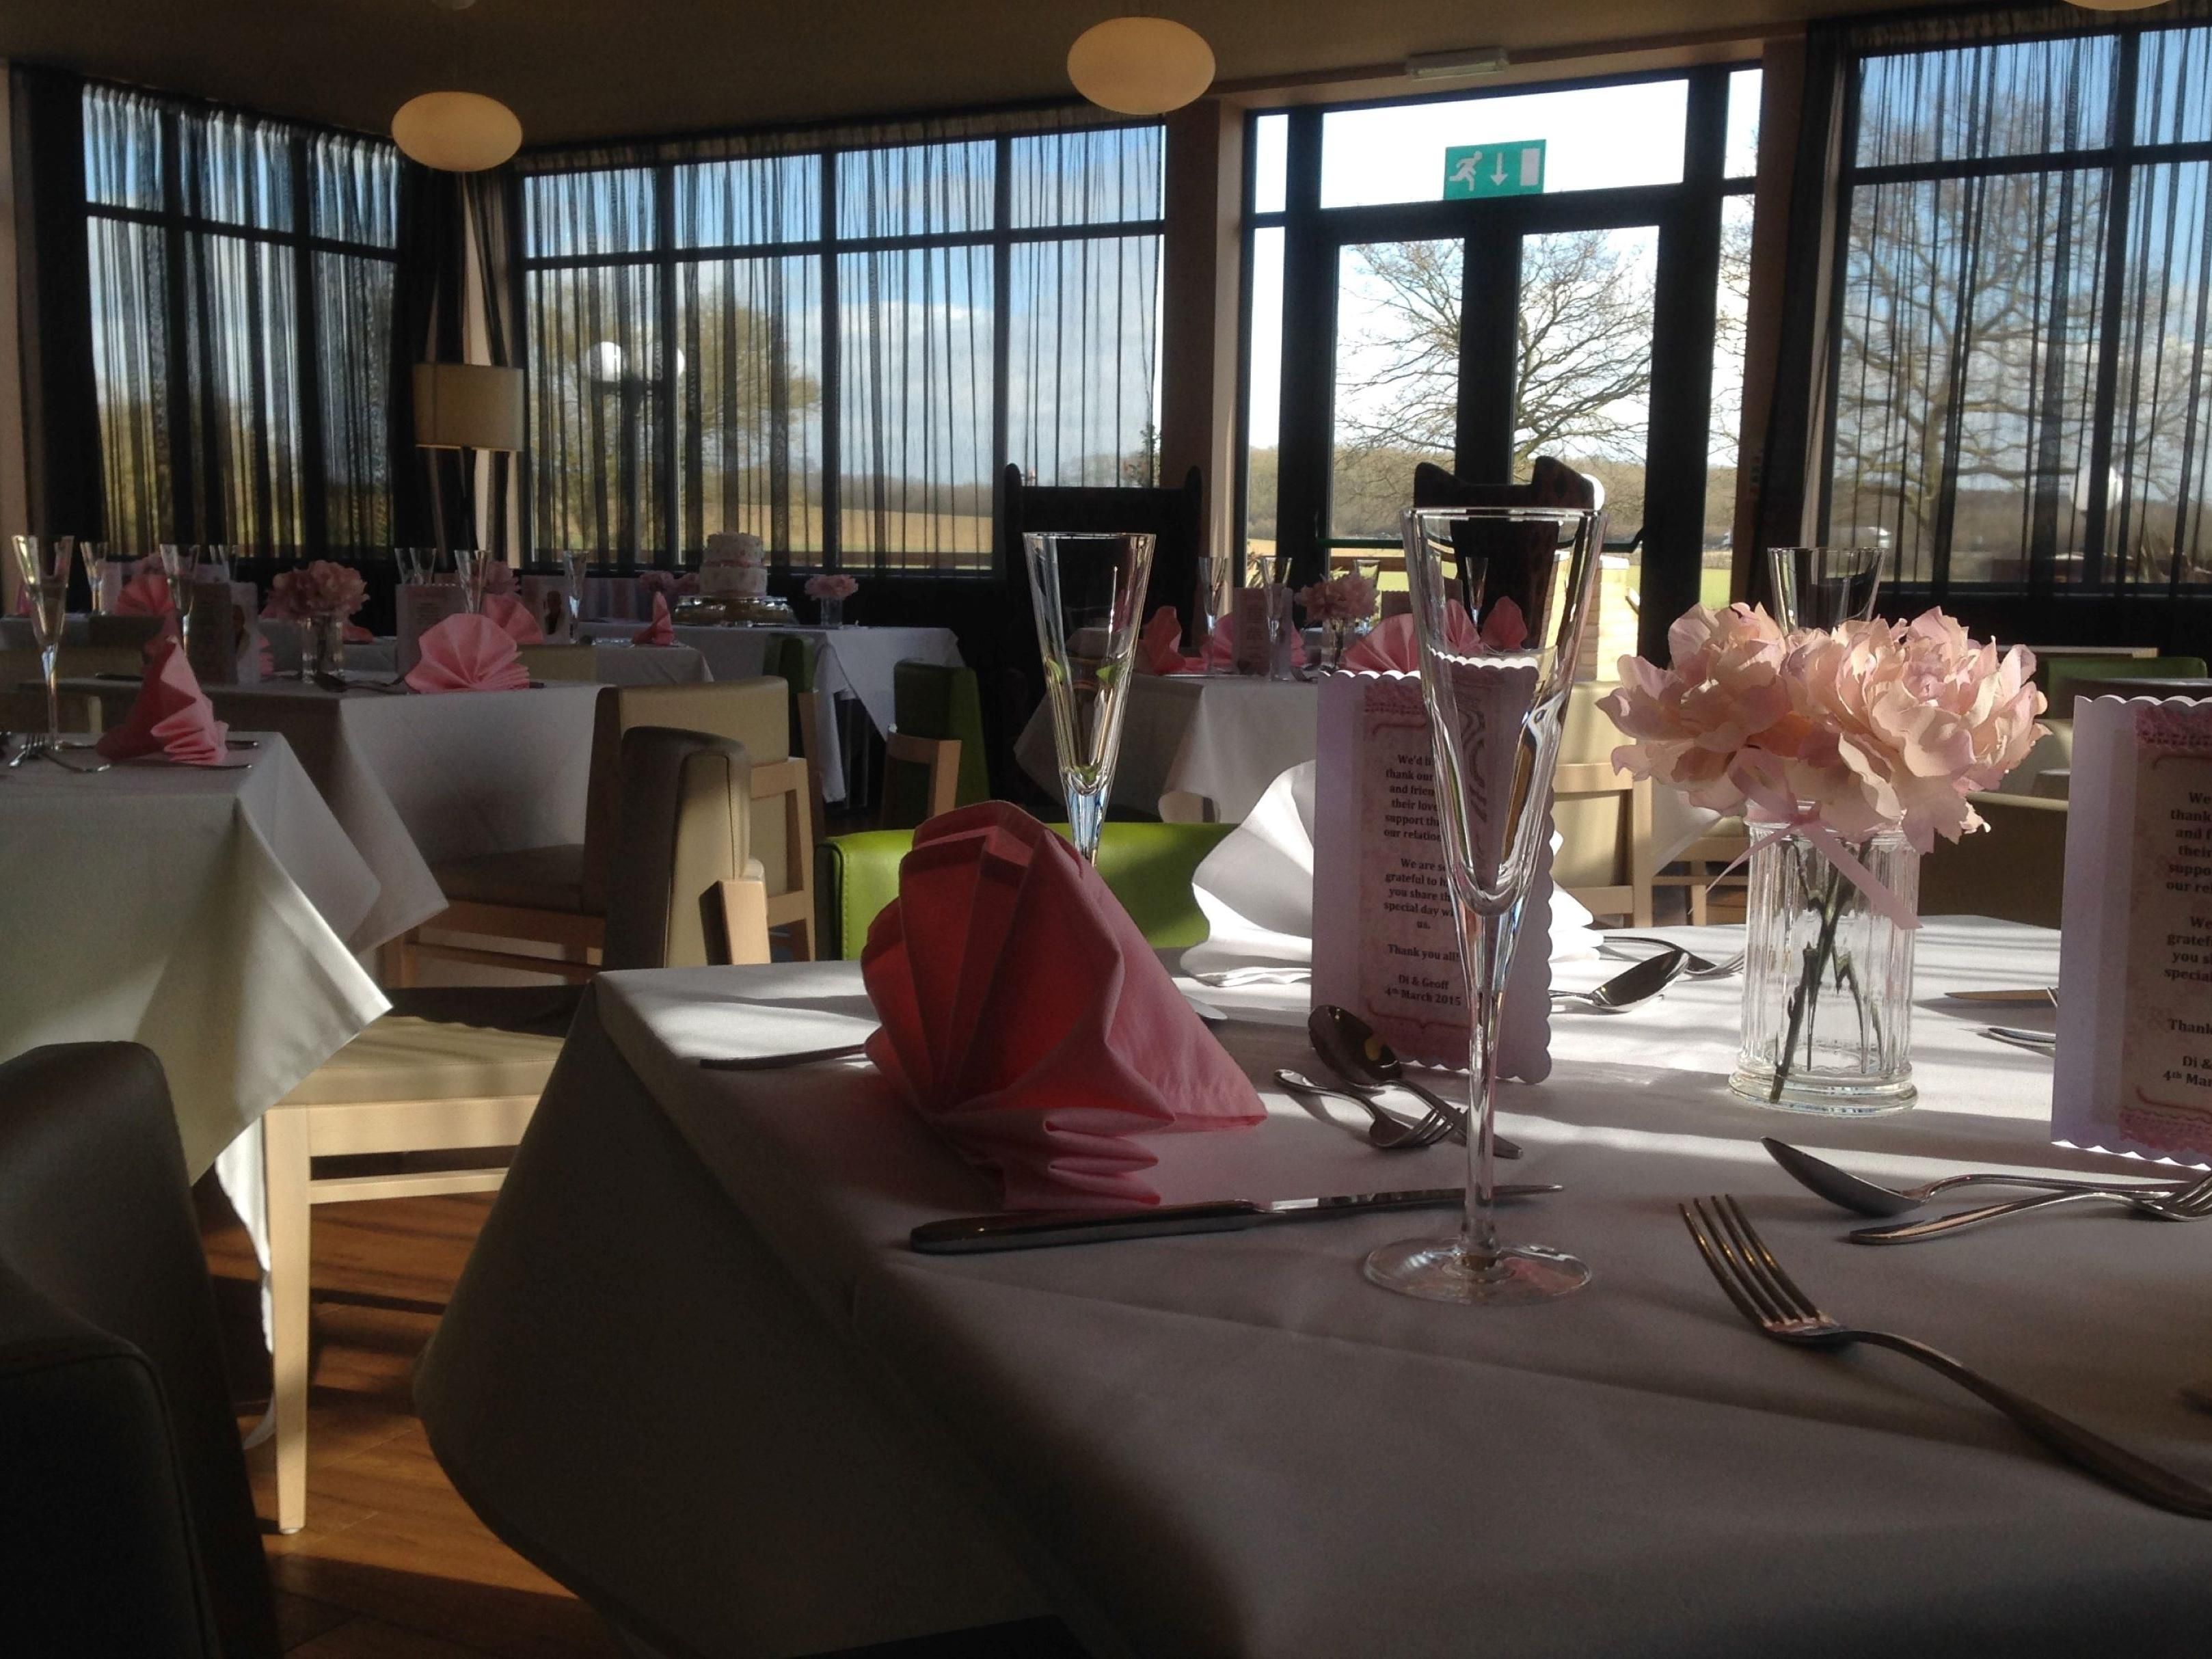 The light and airy restaurant is an ideal venue to host your small wedding reception, funeral or christening celebration. The restaurant is a flexible open-plan space allowing you to spend time with family and friends whilst still creating a warm and homely atmosphere. For further information speak to our team on 01480 277277.